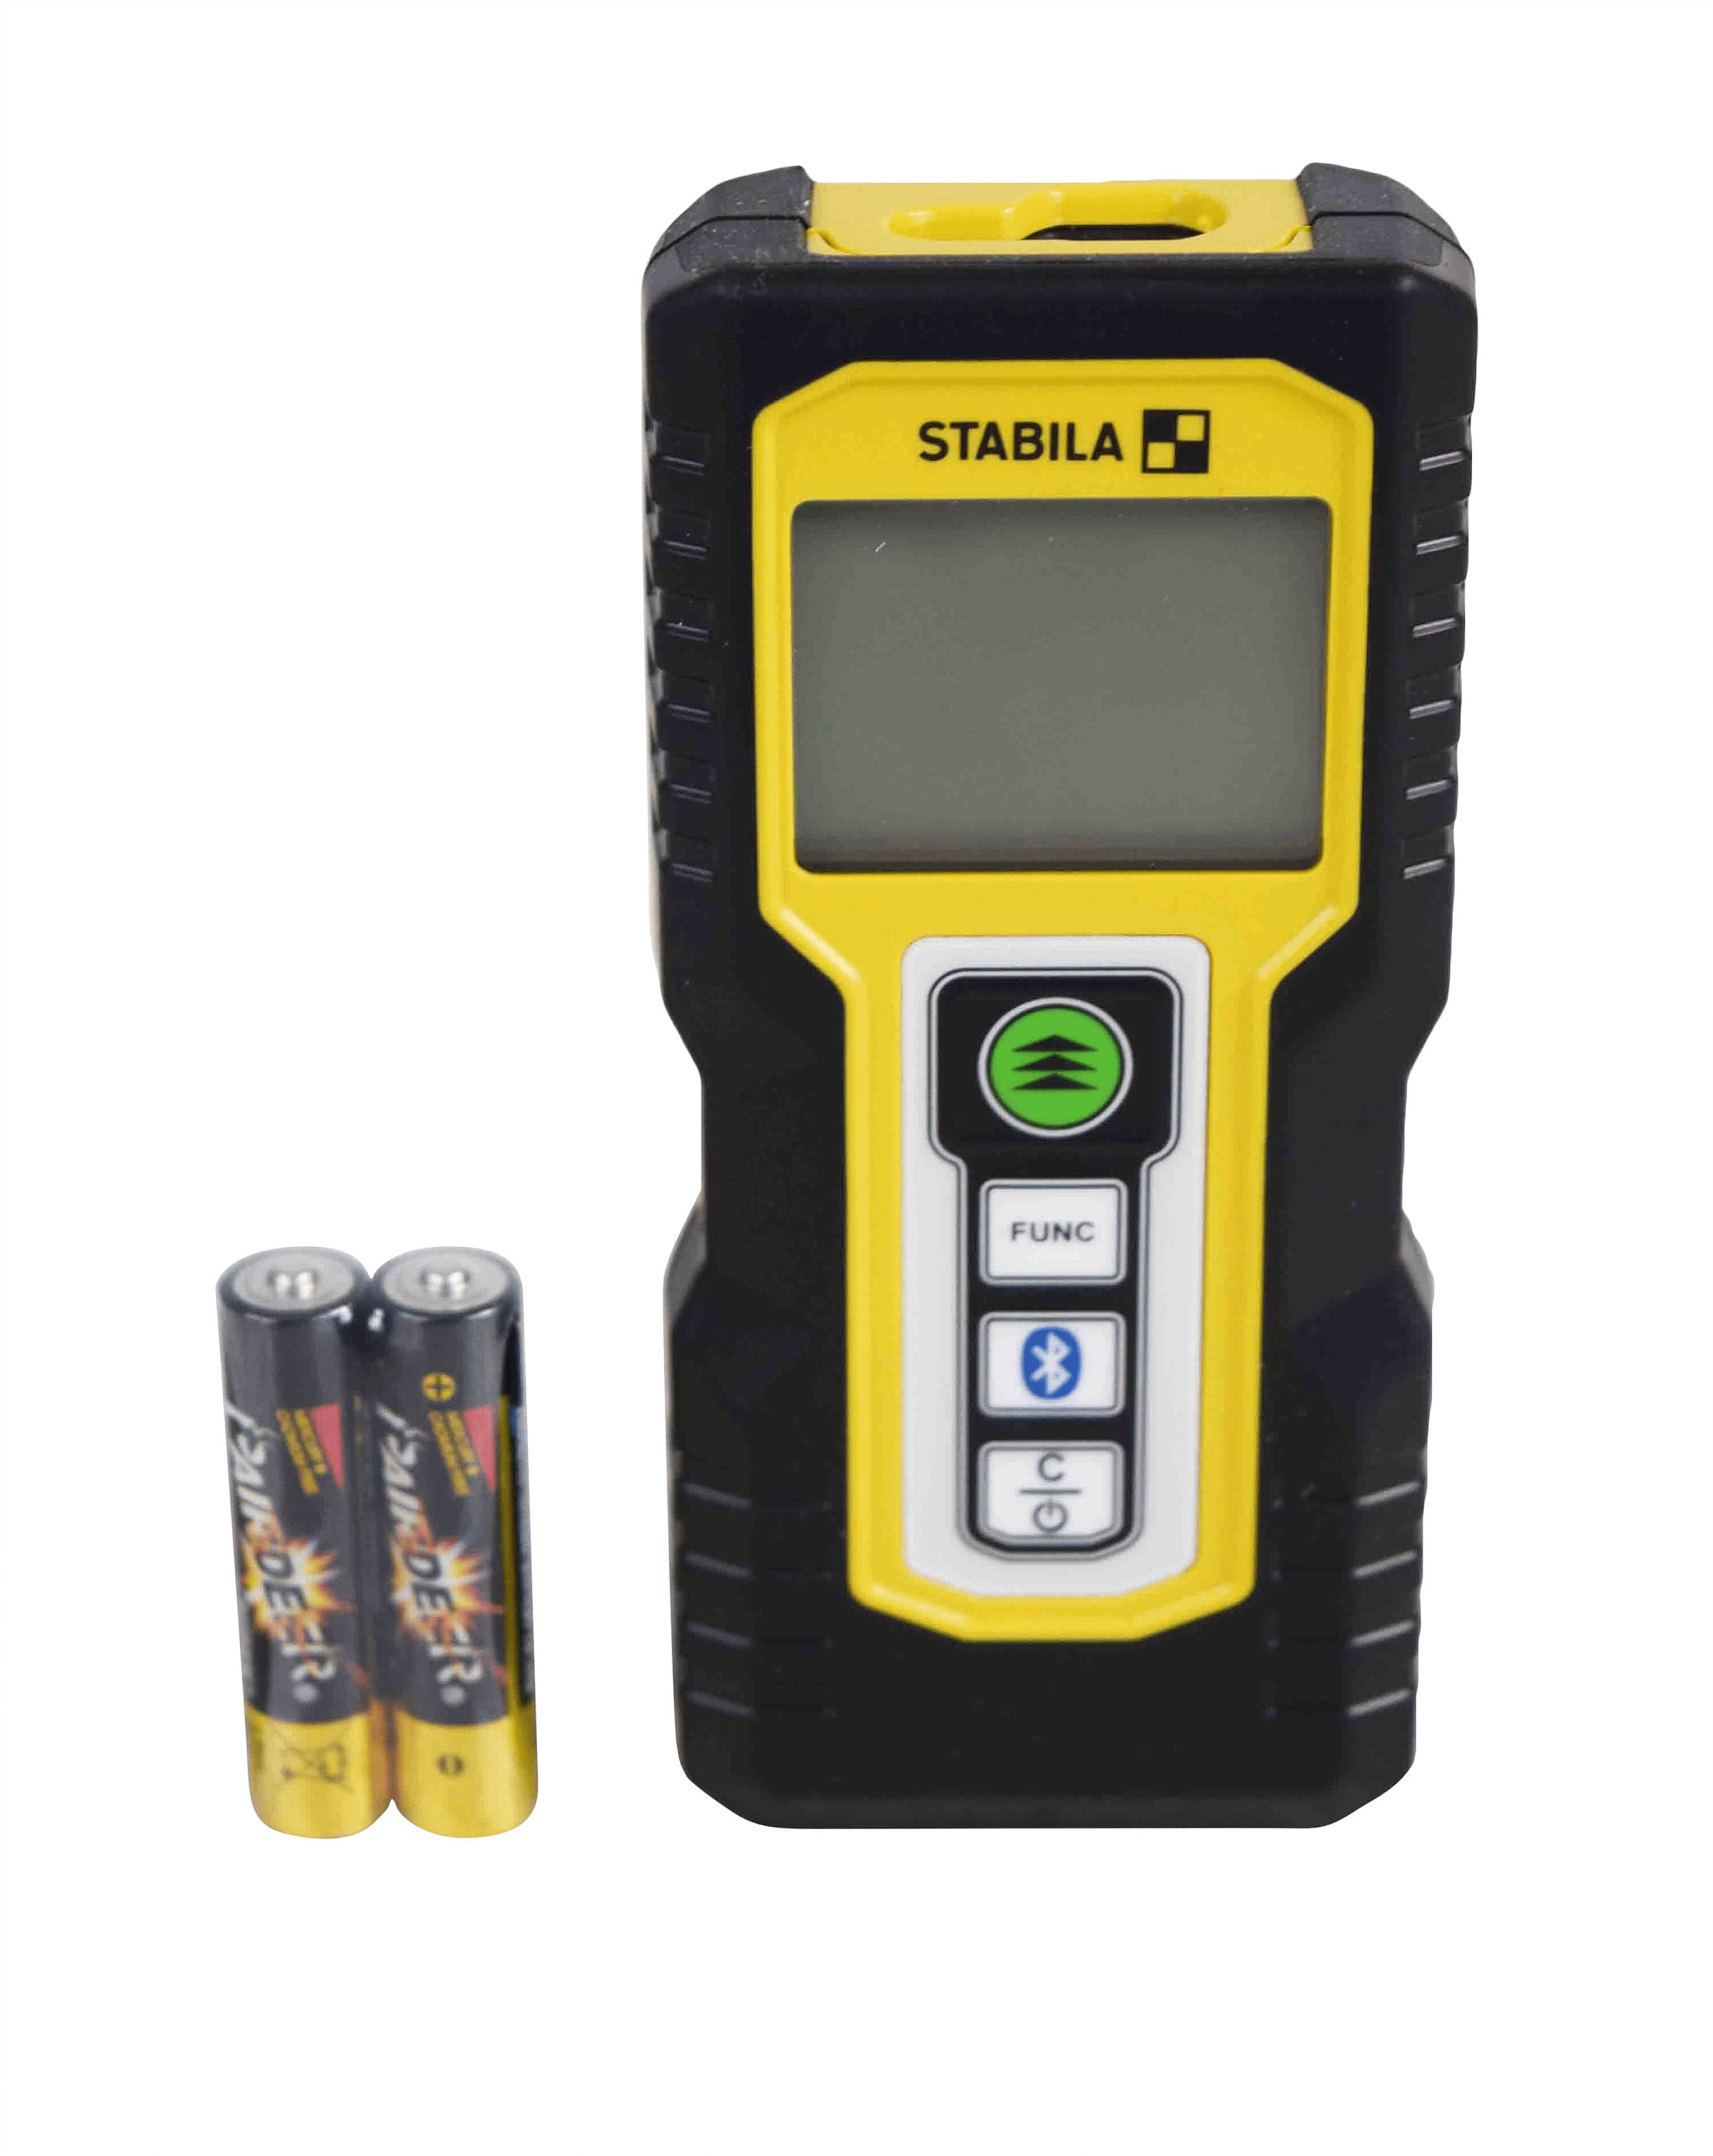 Stabila 06250 Ld250bt Laser Distance Measuring Tool With Bluetooth for sale online 